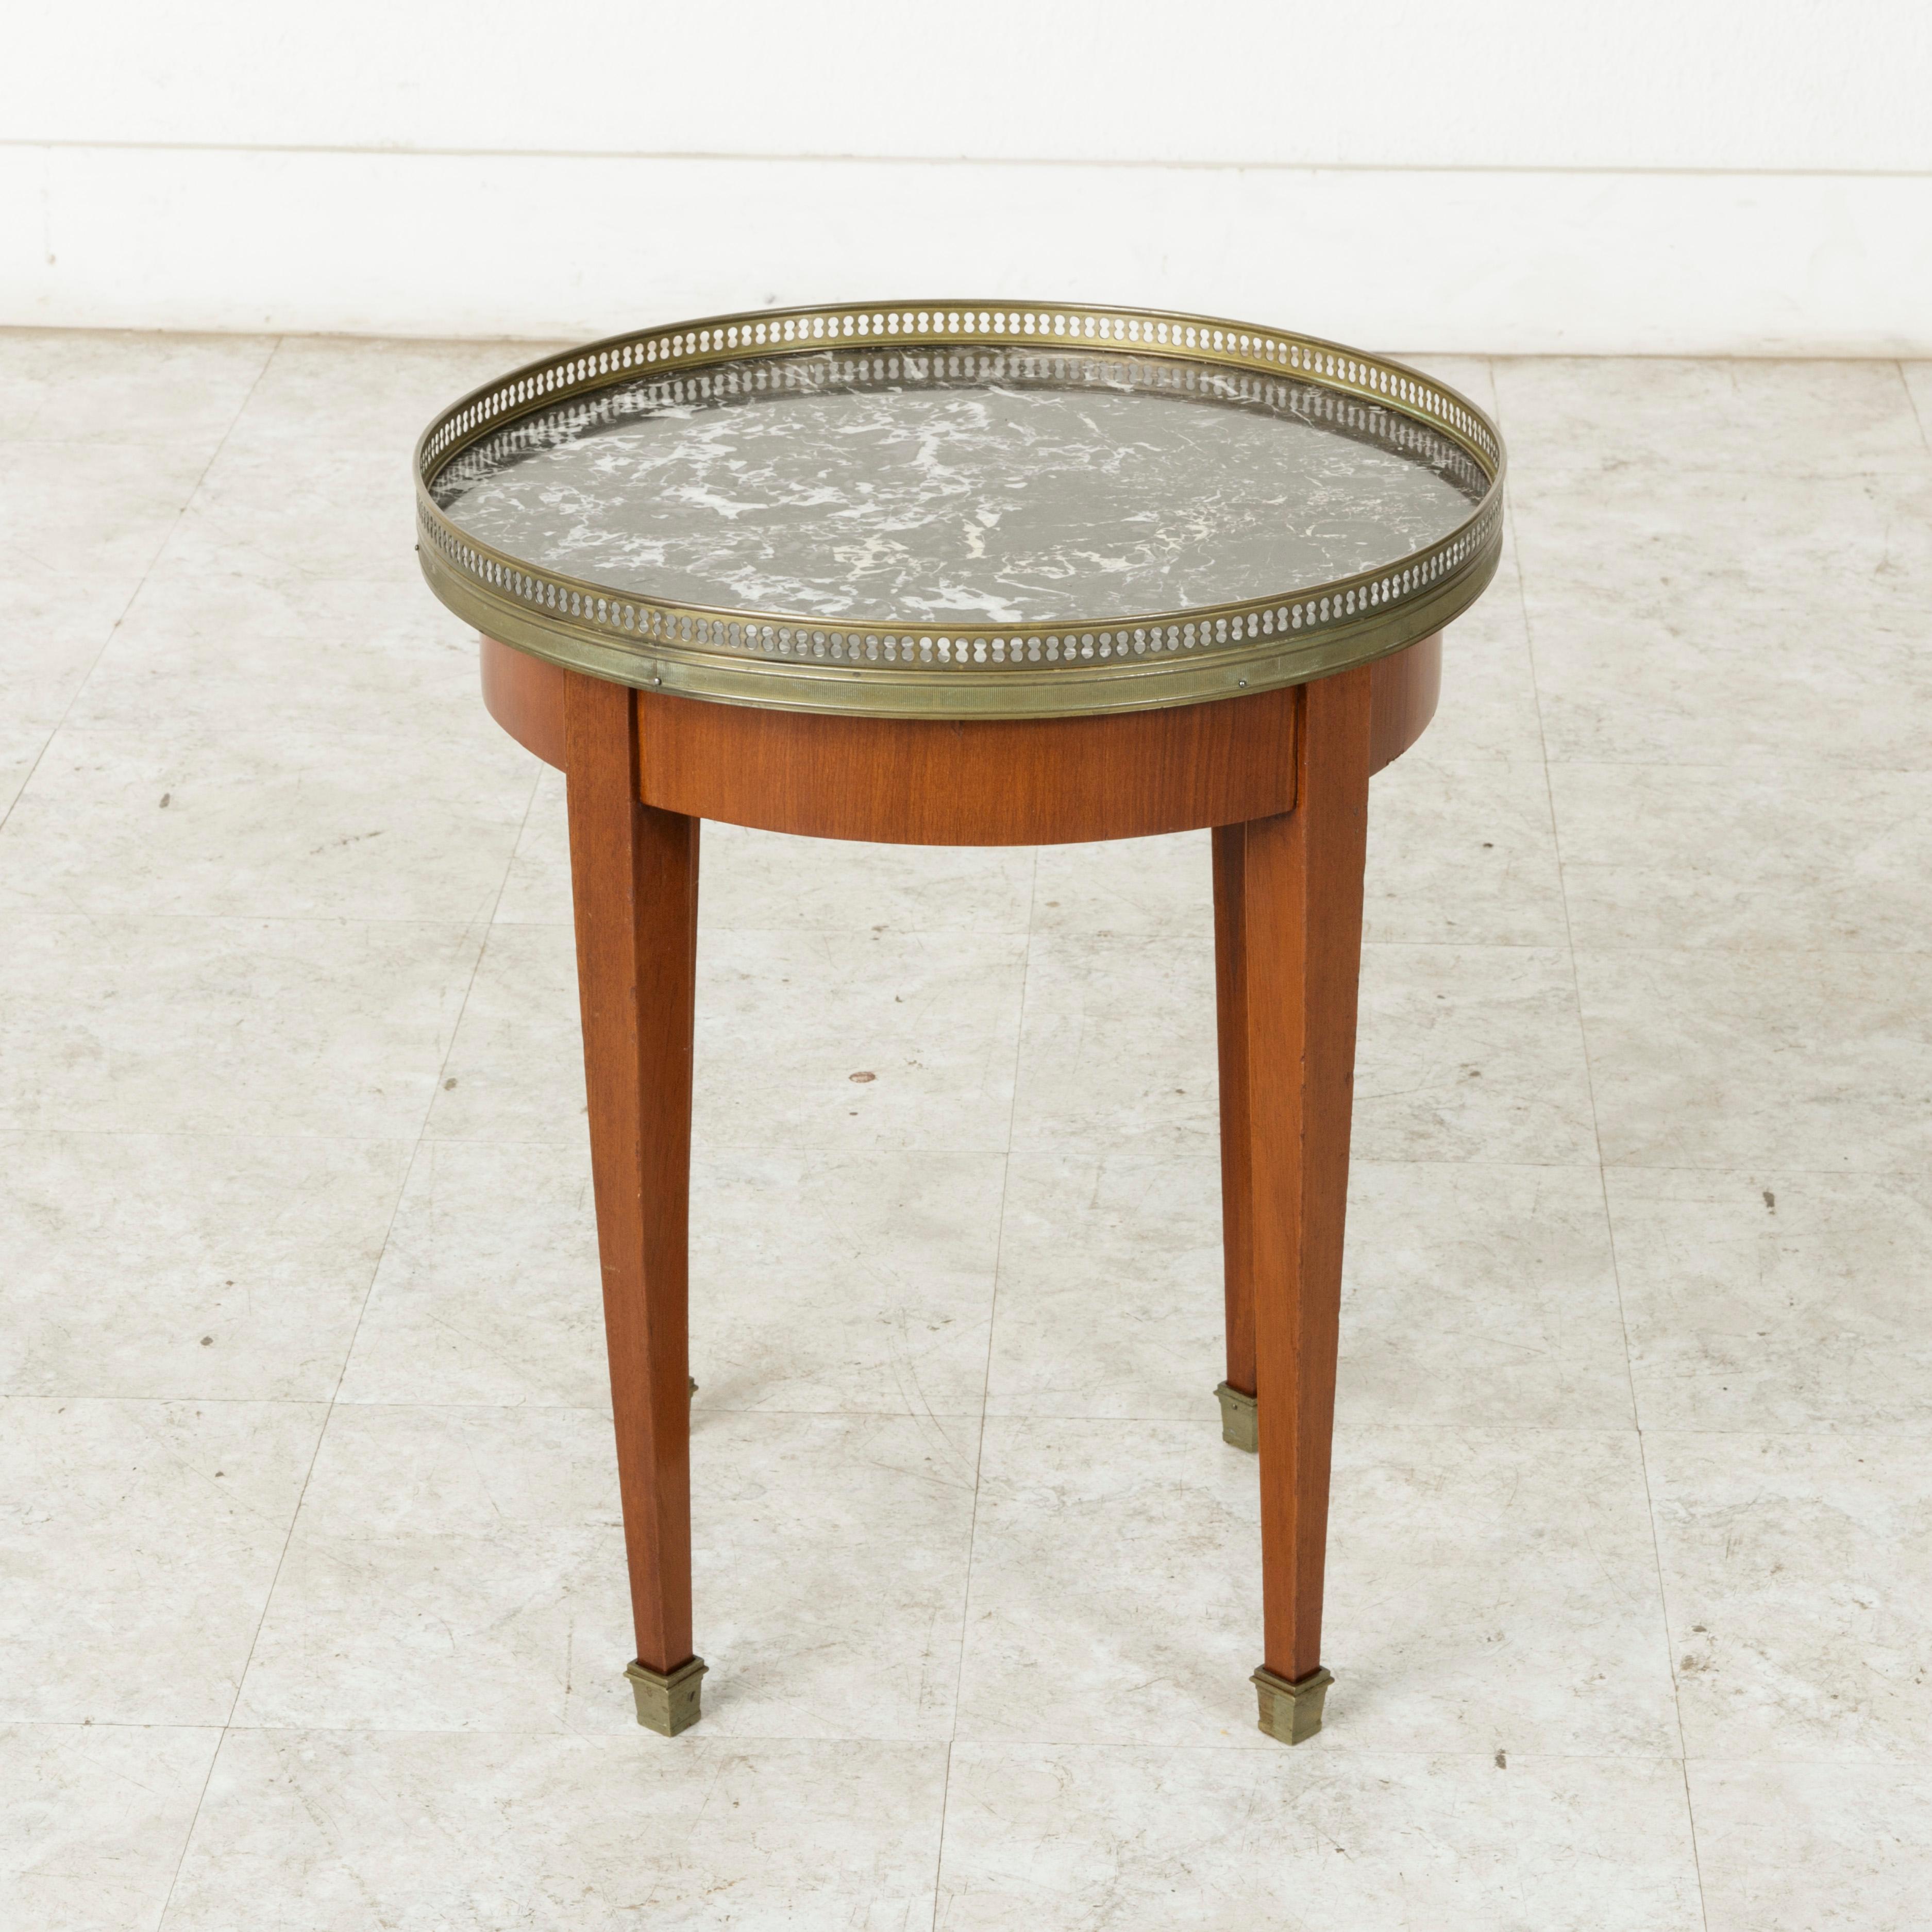 This mid-20th century French Louis XVI style cherrywood side table features a Saint Anne marble top surrounded by a pierced brass gallery. The tabletop rests on four tapered square legs finished with brass sabots. An ideal table beside a chair,